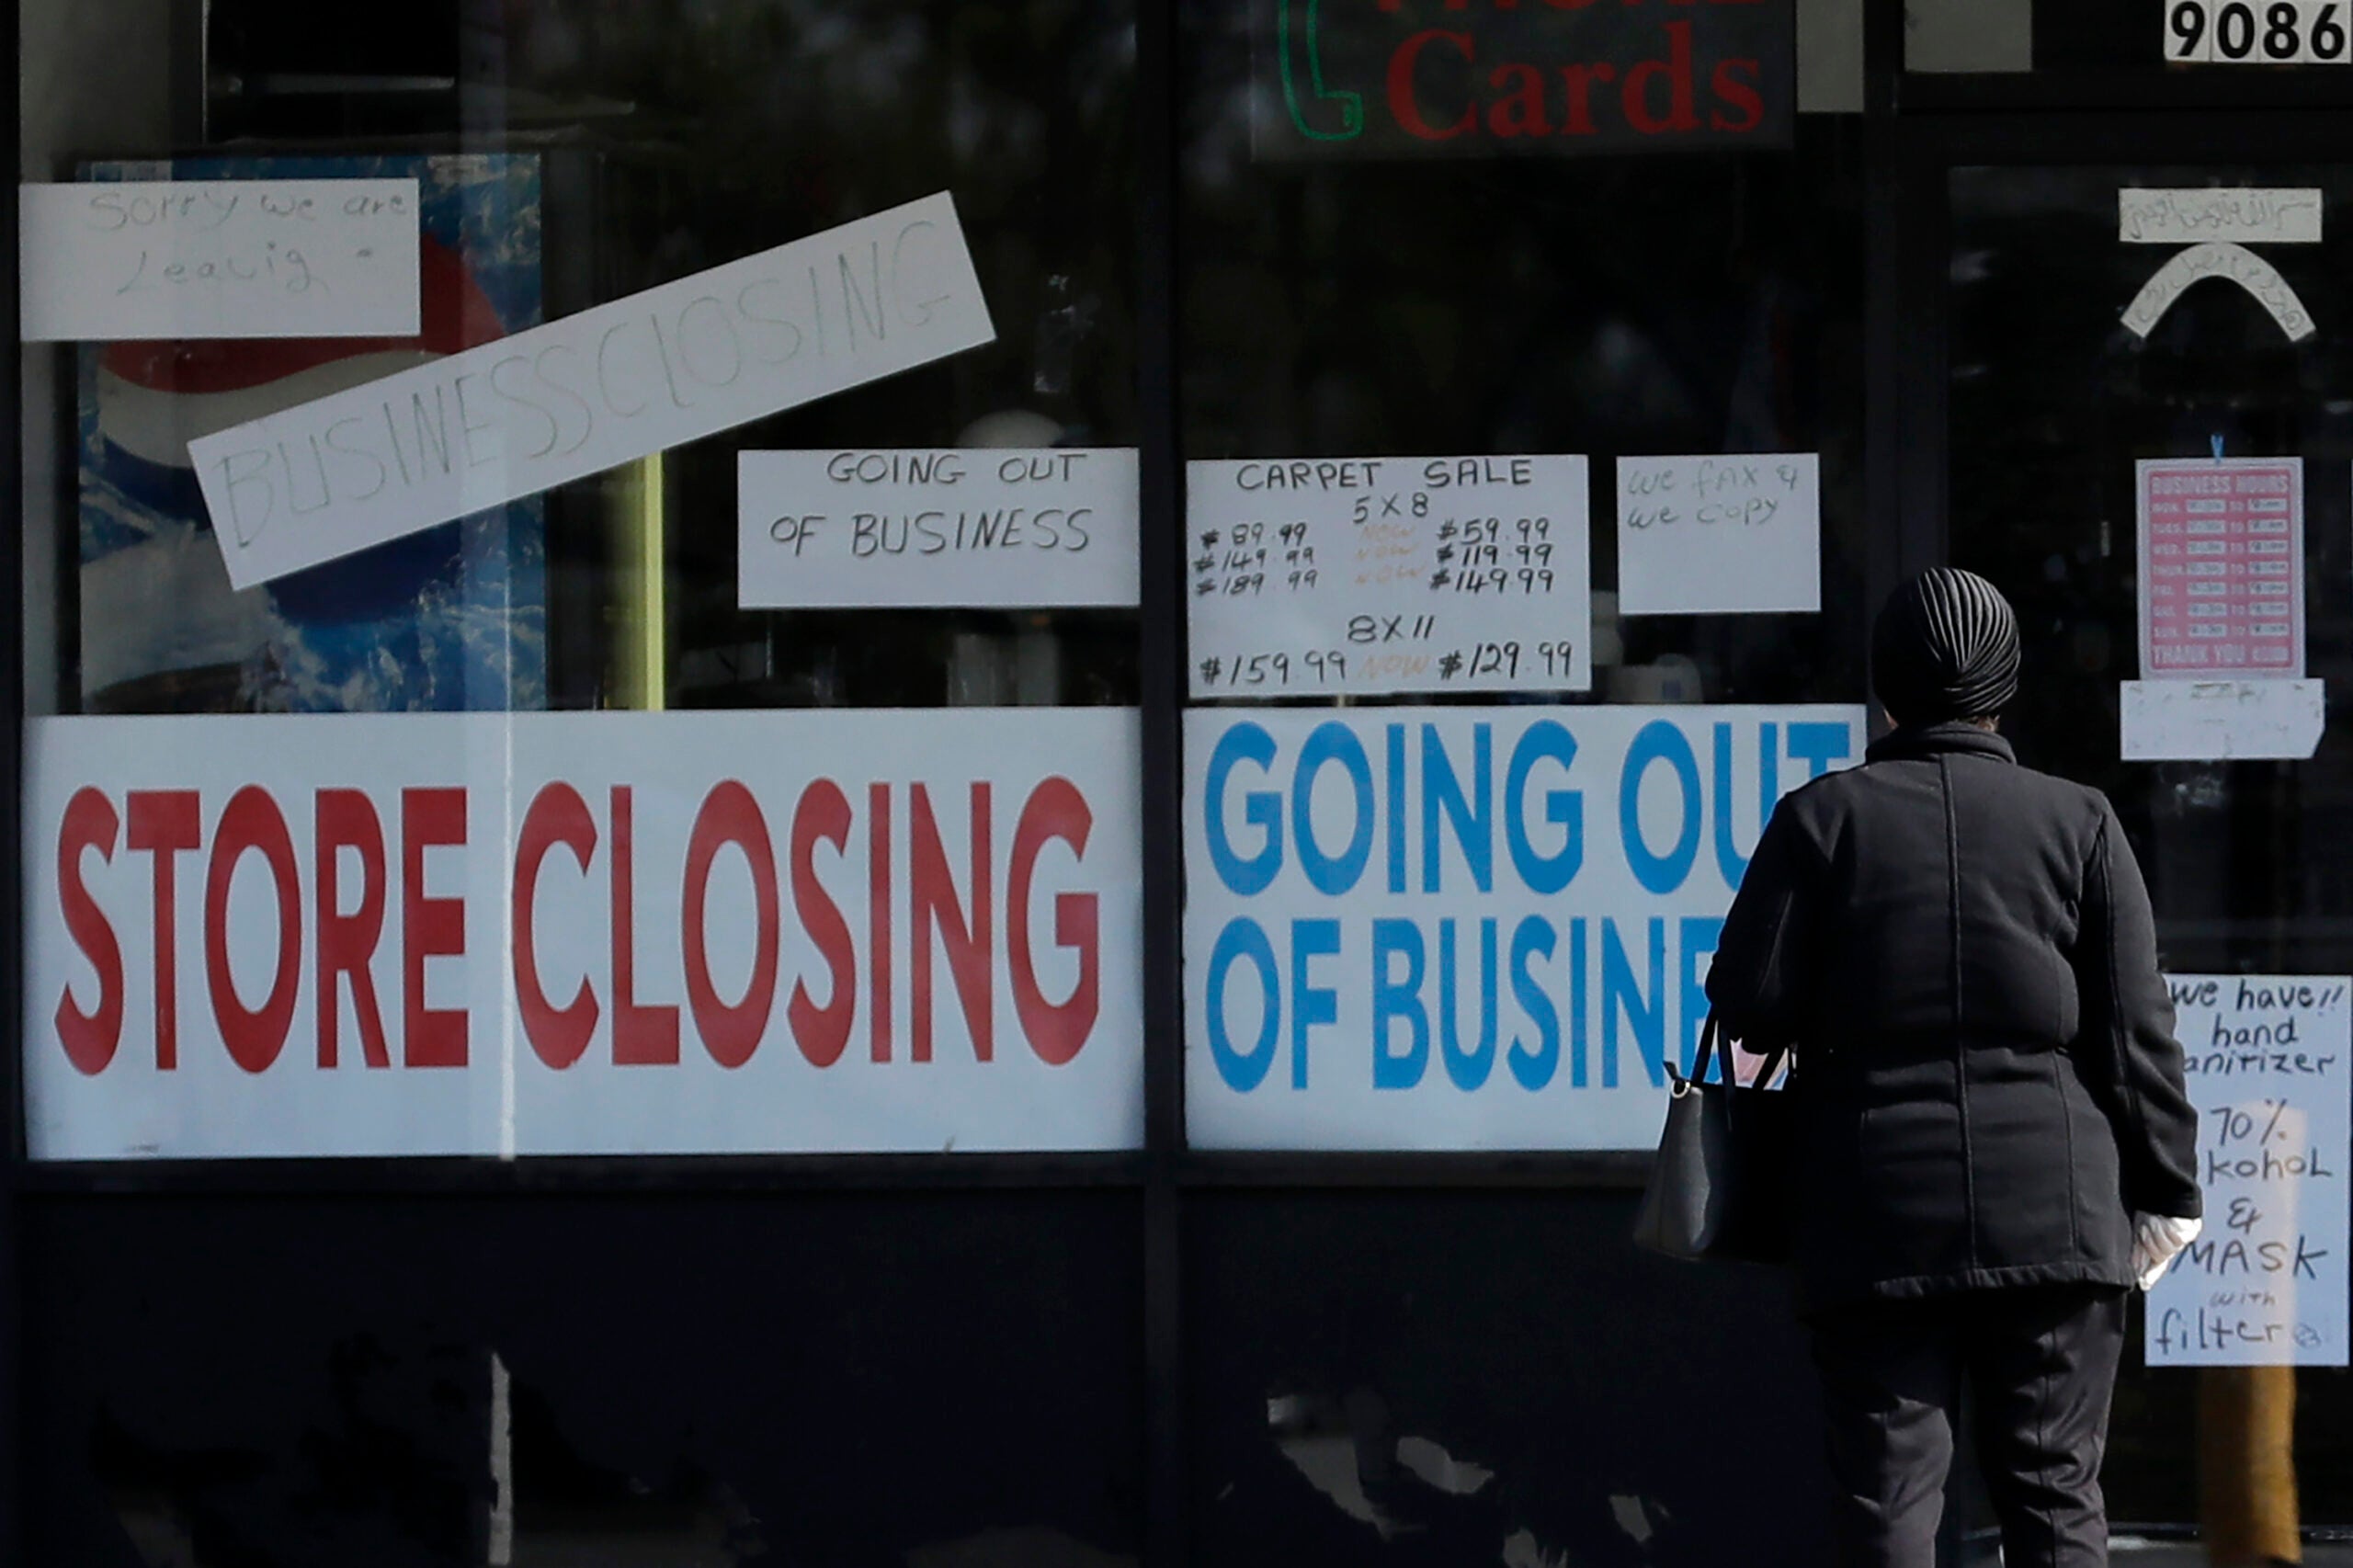 A woman looks at signs at a store closed due to COVID-19.